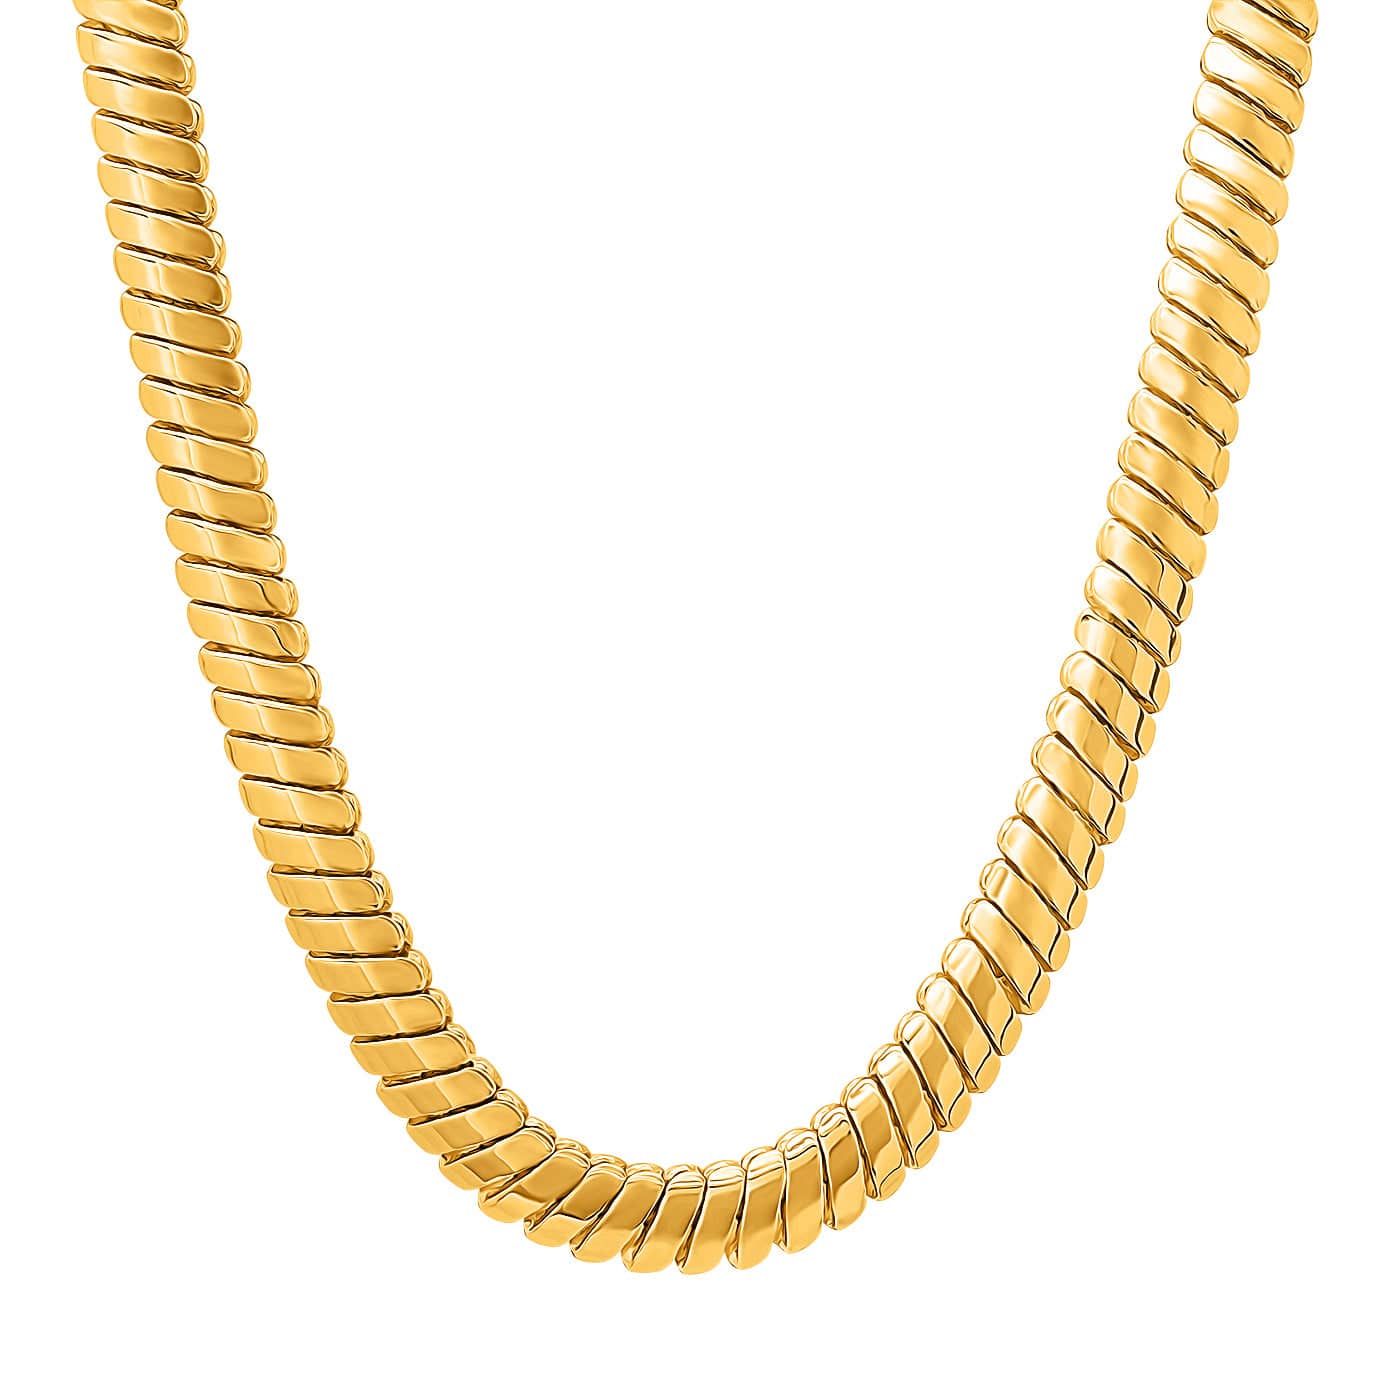 TAI JEWELRY Necklace 6.5MM Gold Snake Chain